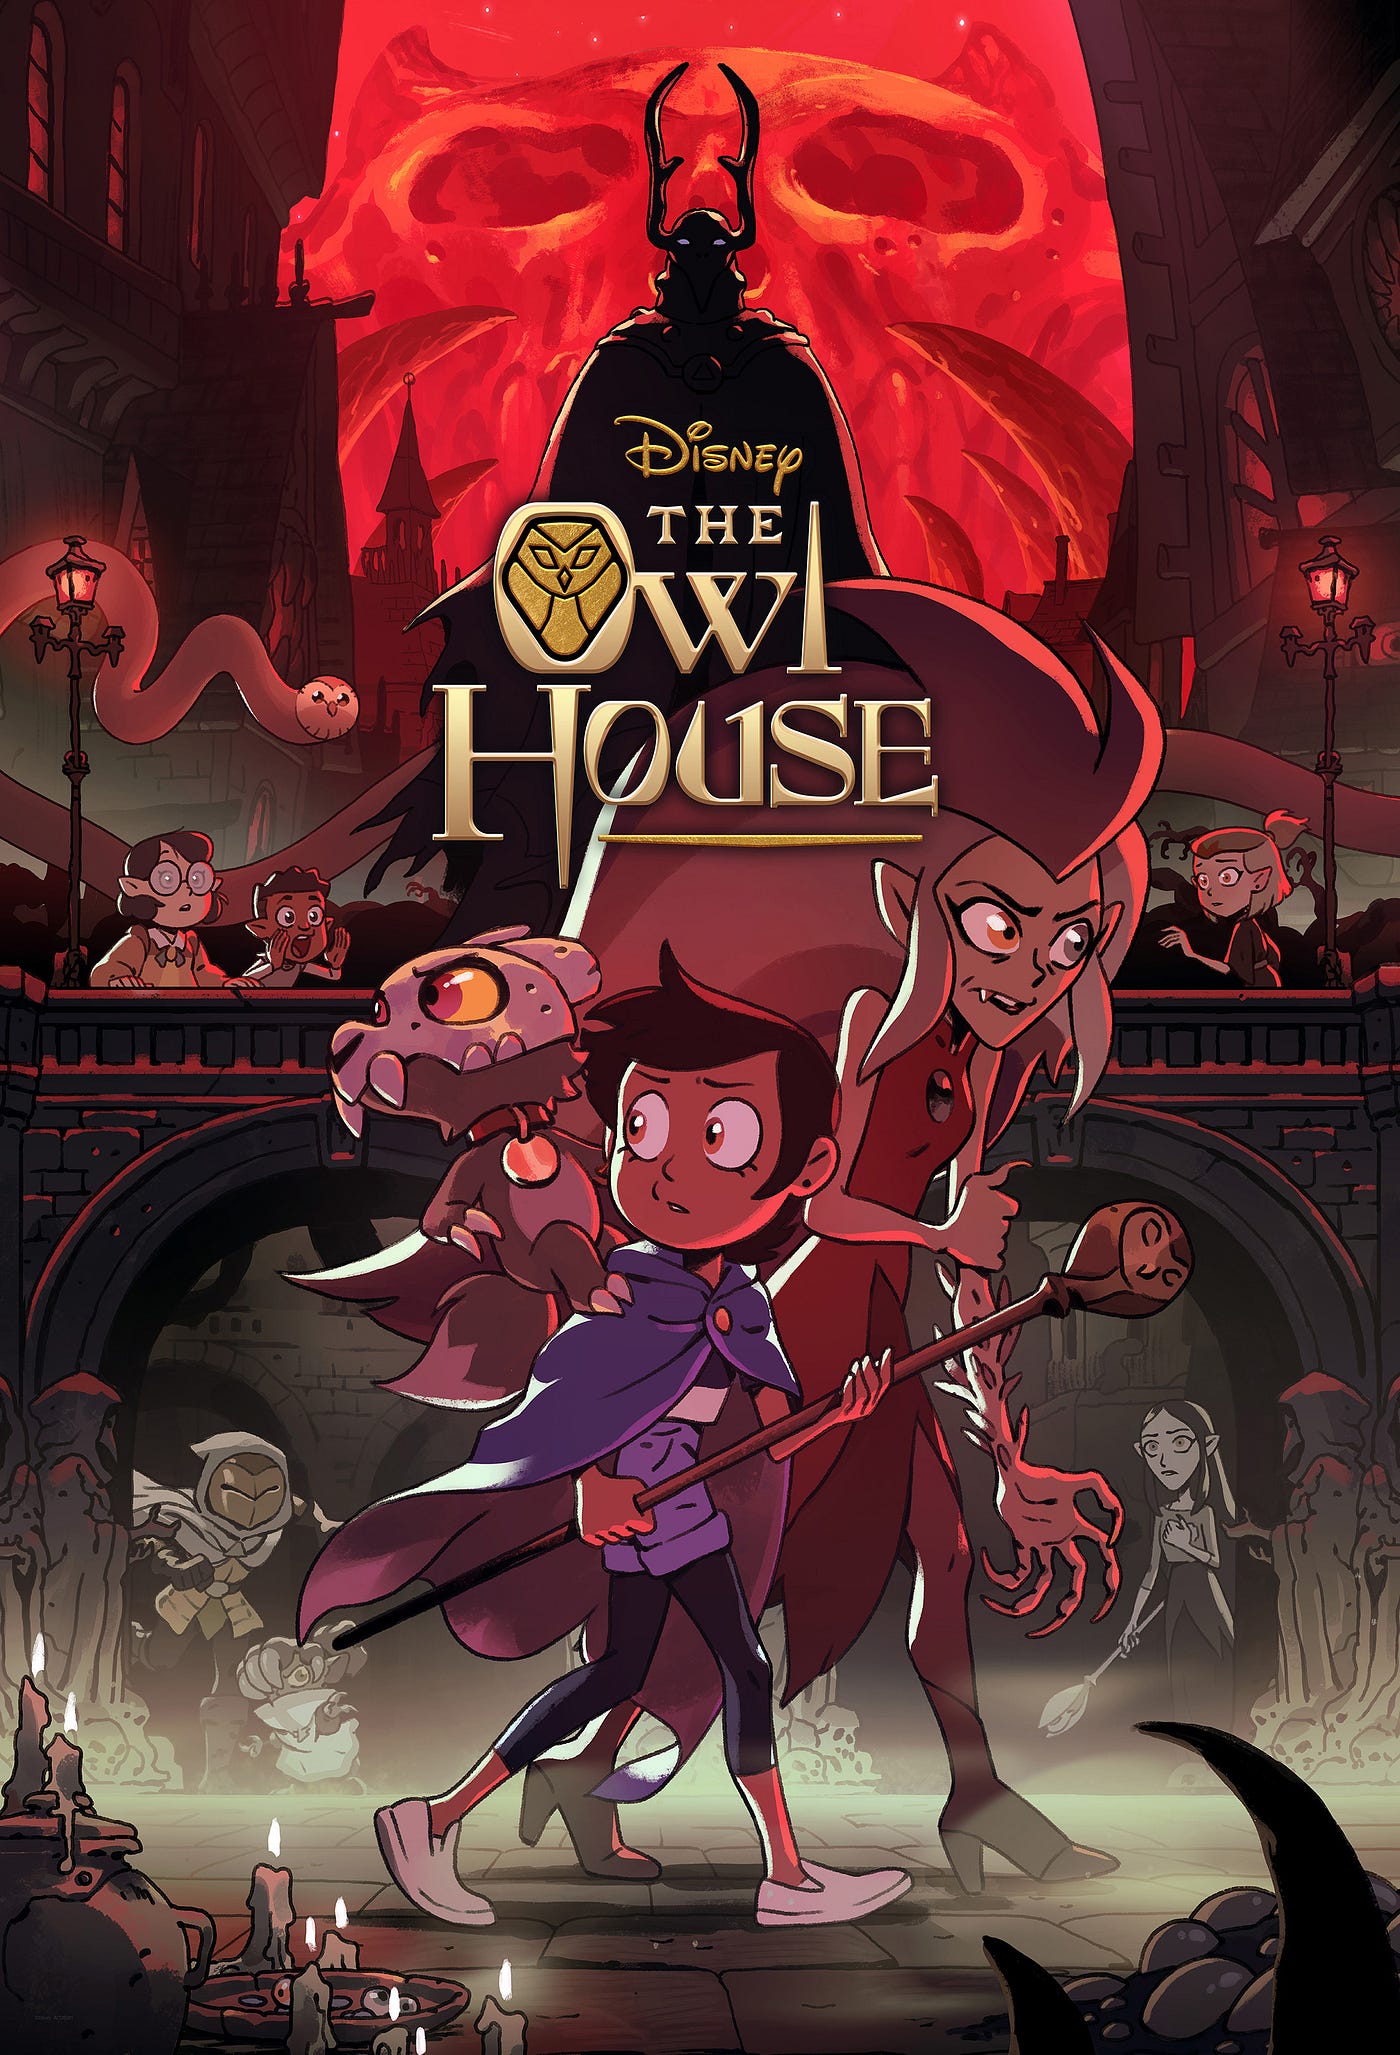 The Owl House: Age of all important characters